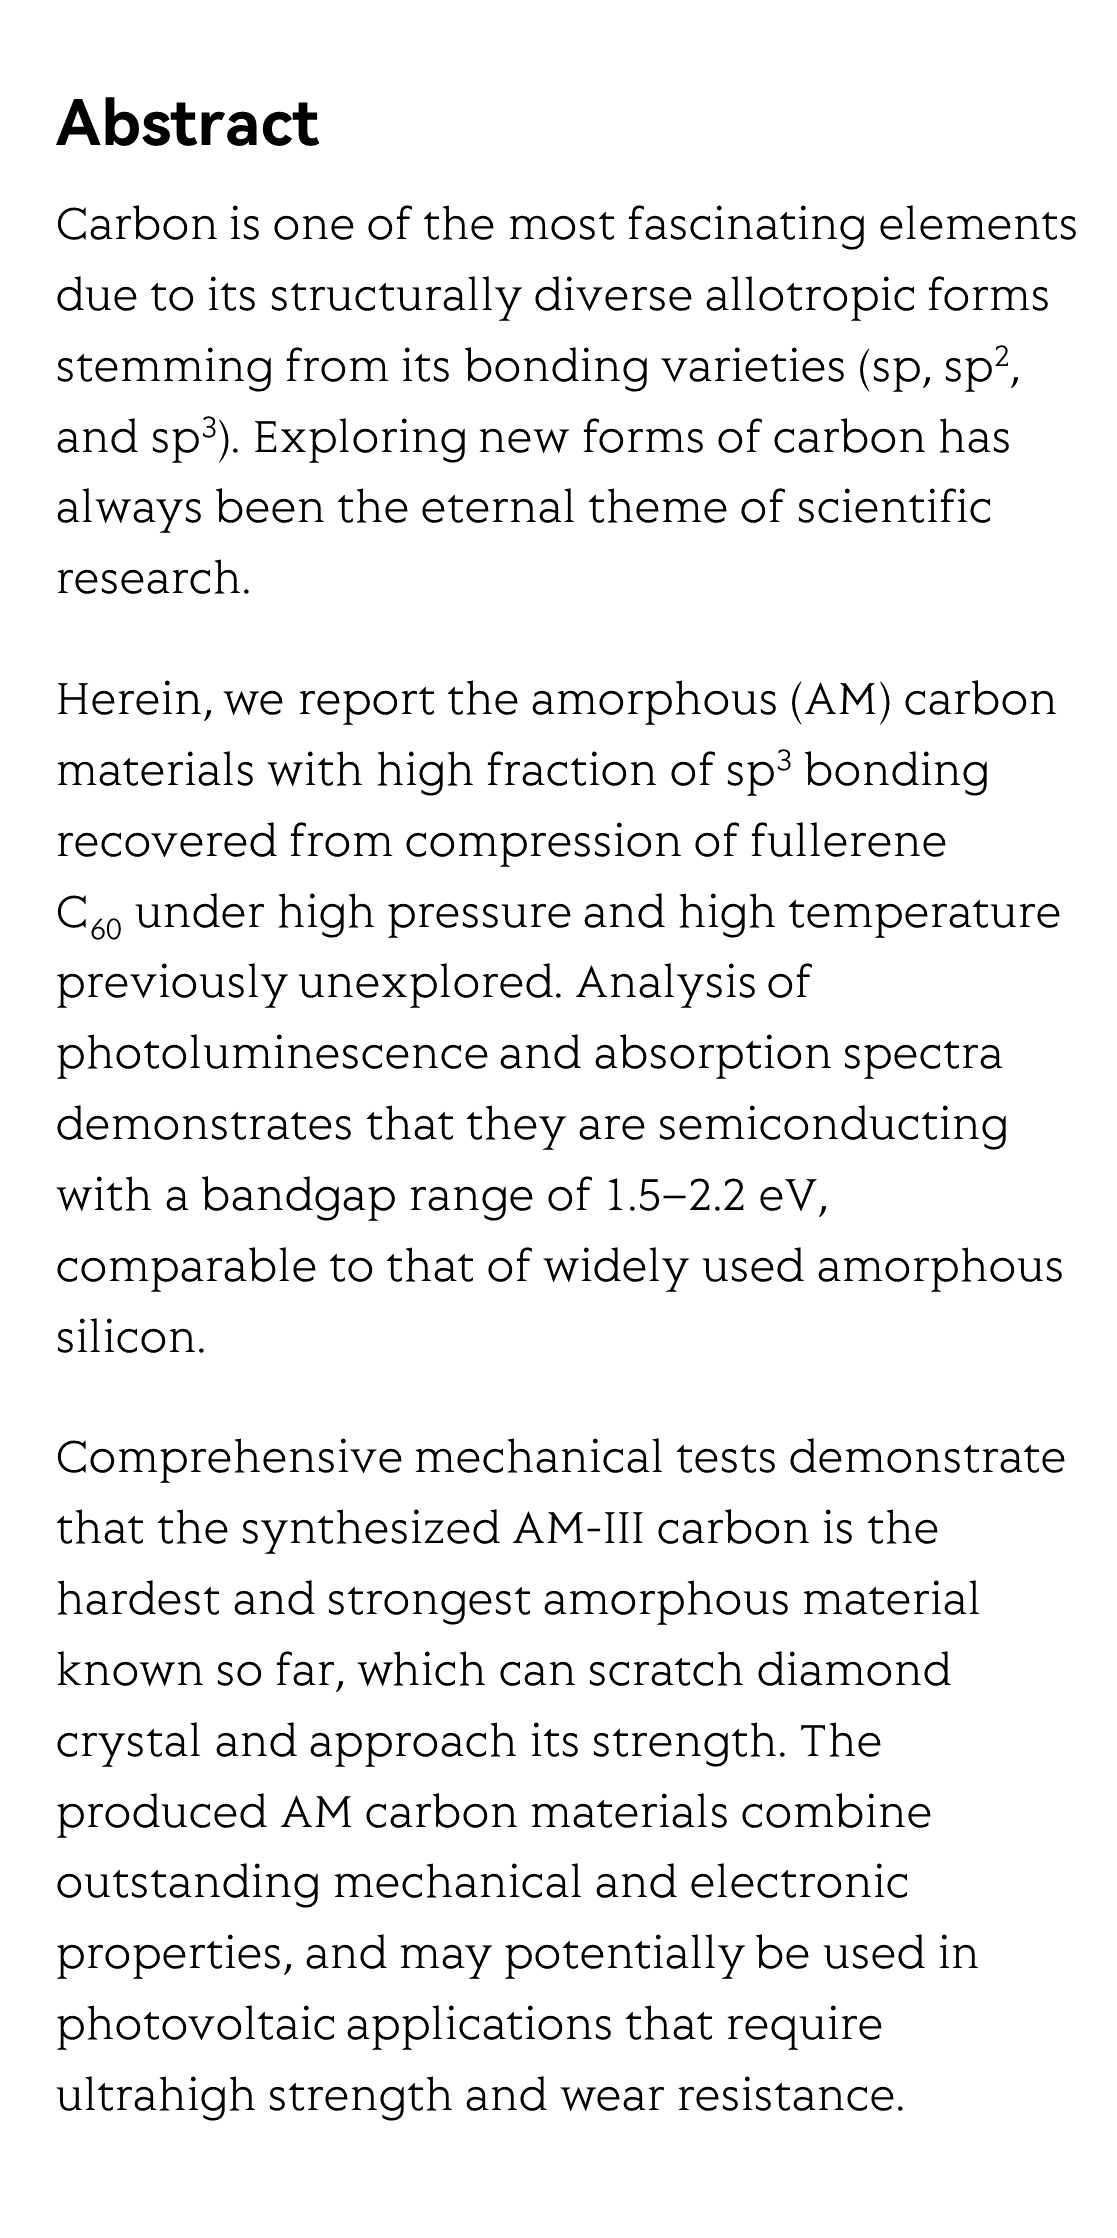 Discovery of carbon-based strongest and hardest amorphous material_2